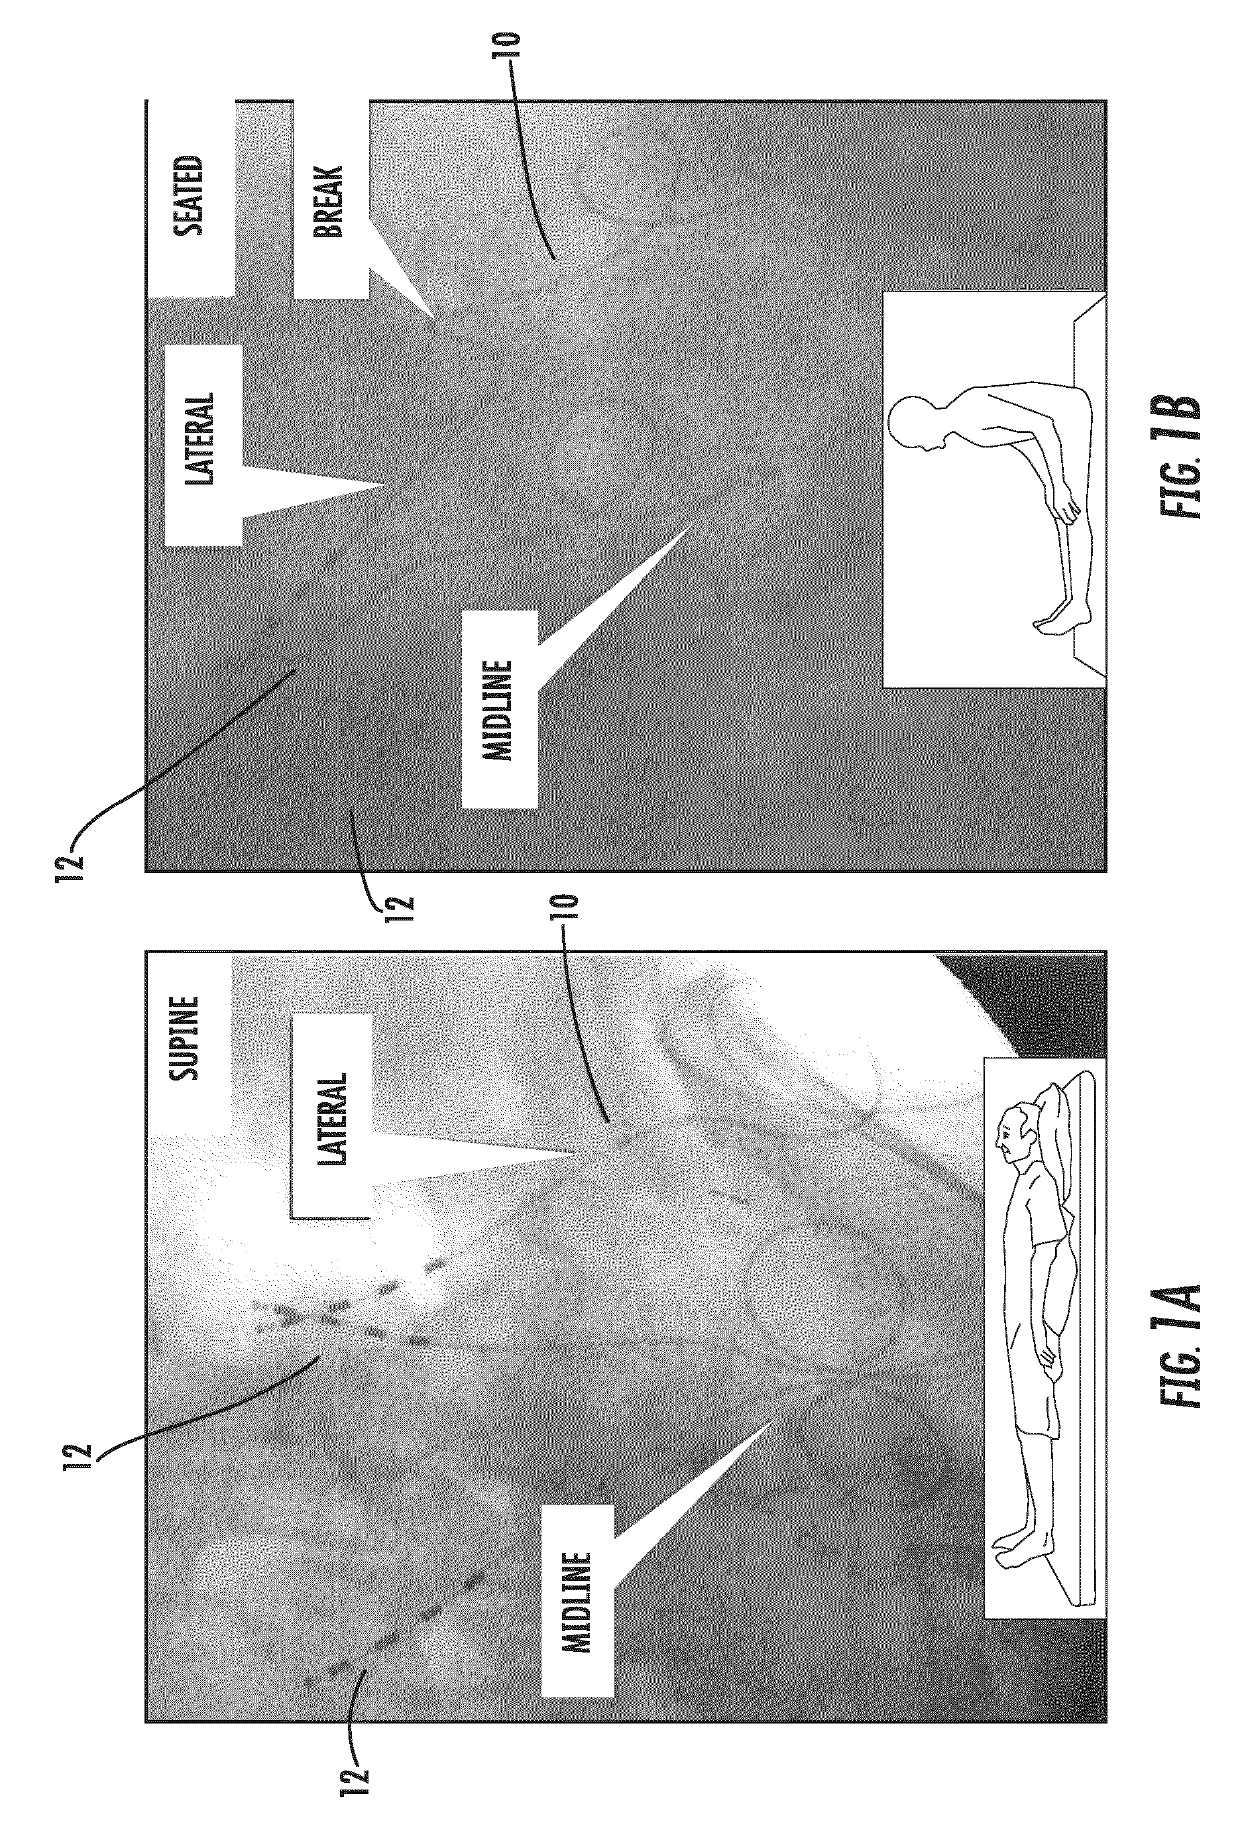 Systems and methods for enhanced implantation of electrode leads between tissue layers